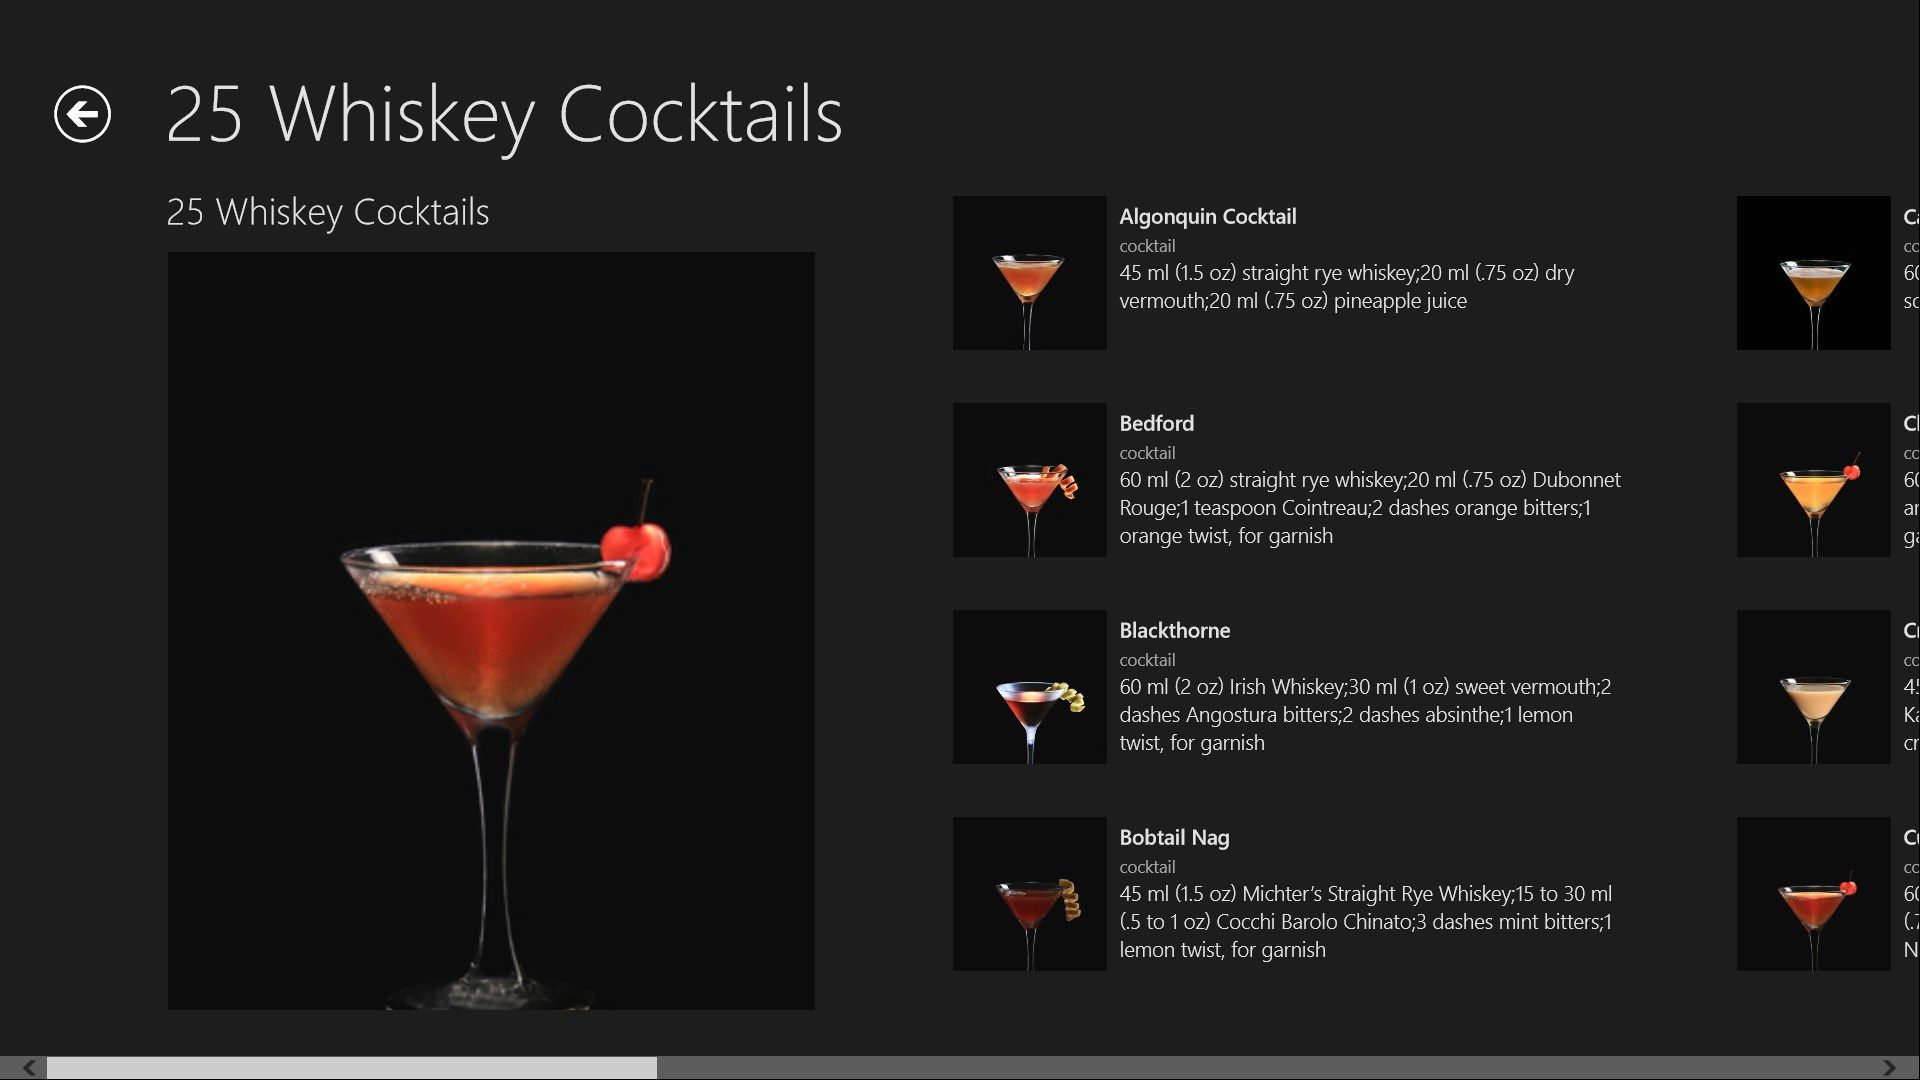 View of the whole group of cocktails with pictures and brief details